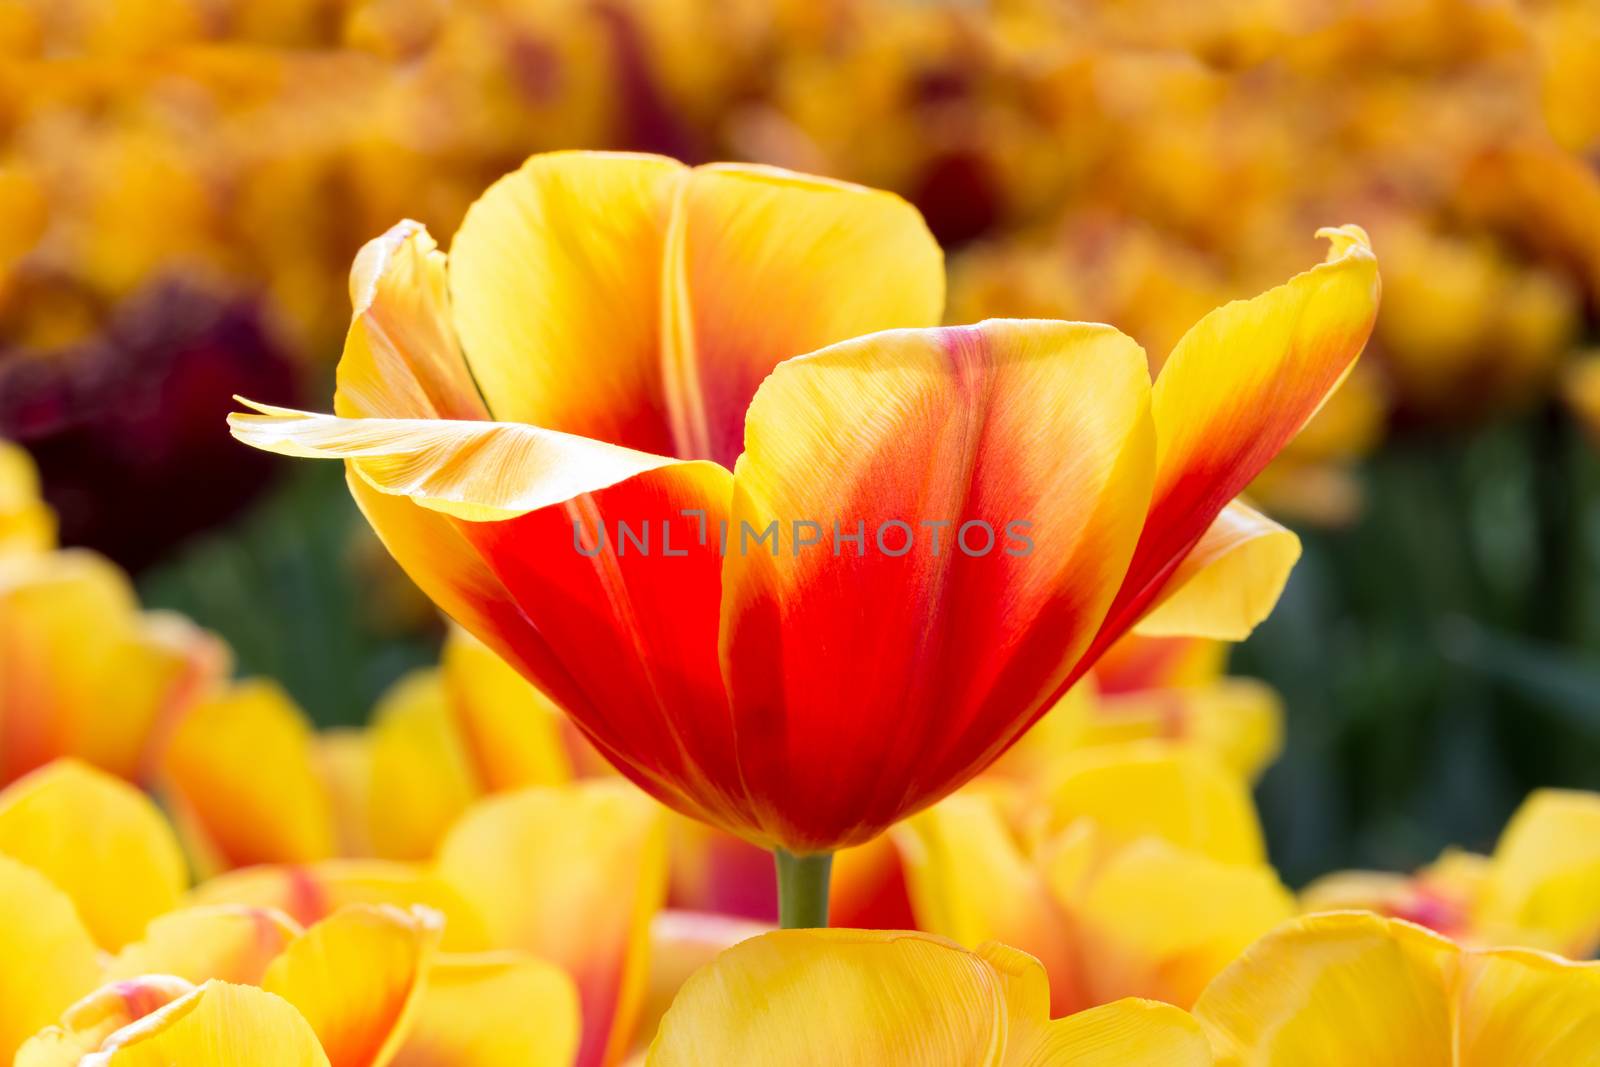 Red with yellow tulip in flowers field by BenSchonewille